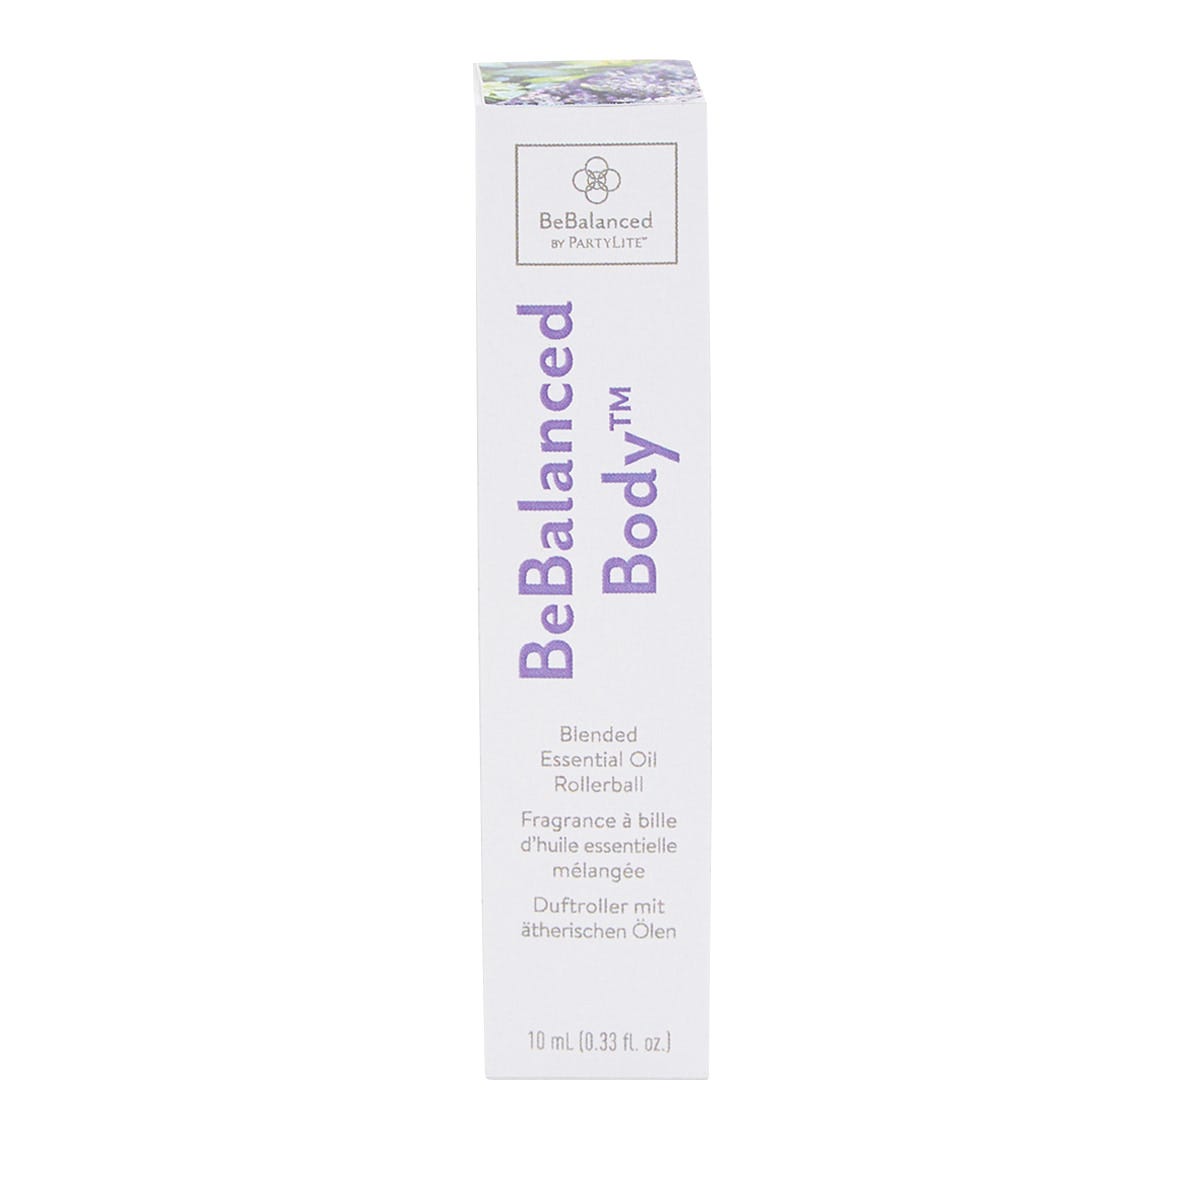 Be Relaxed Lavender + Patchouli Essential Oil Rollerball - PartyLite US